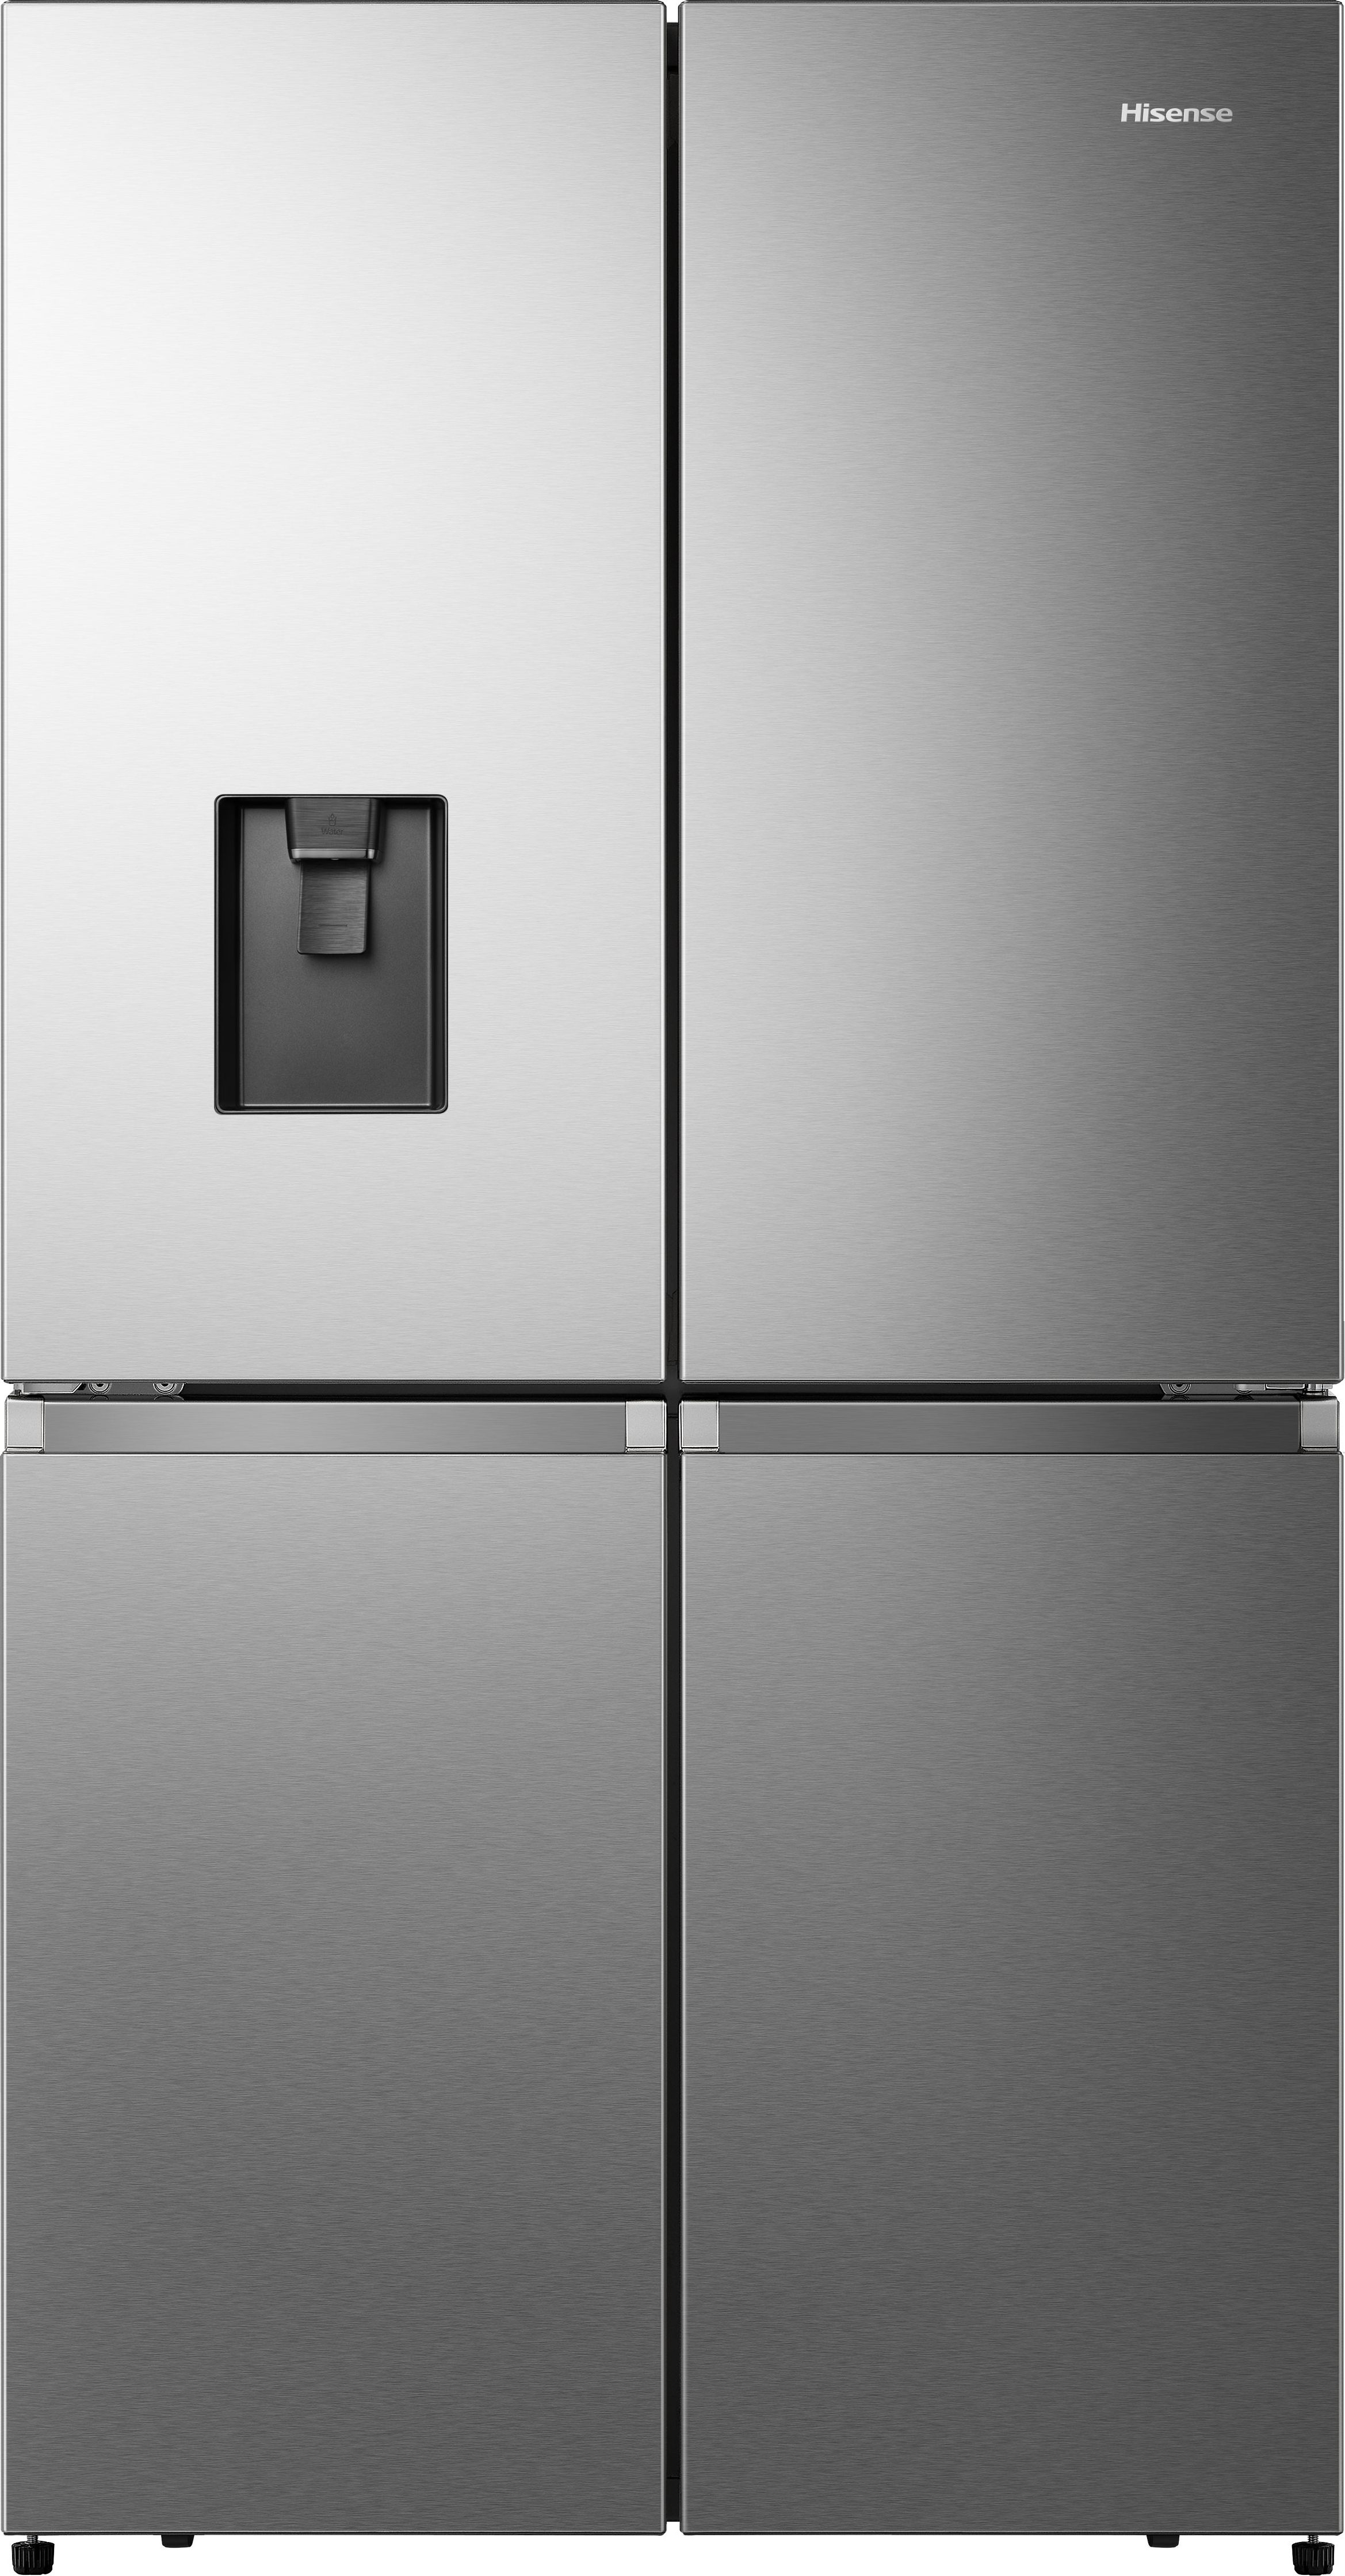 Hisense RQ758N4SWSE Wifi Connected Non-Plumbed Total No Frost American Fridge Freezer - Stainless Steel - E Rated, Stainless Steel